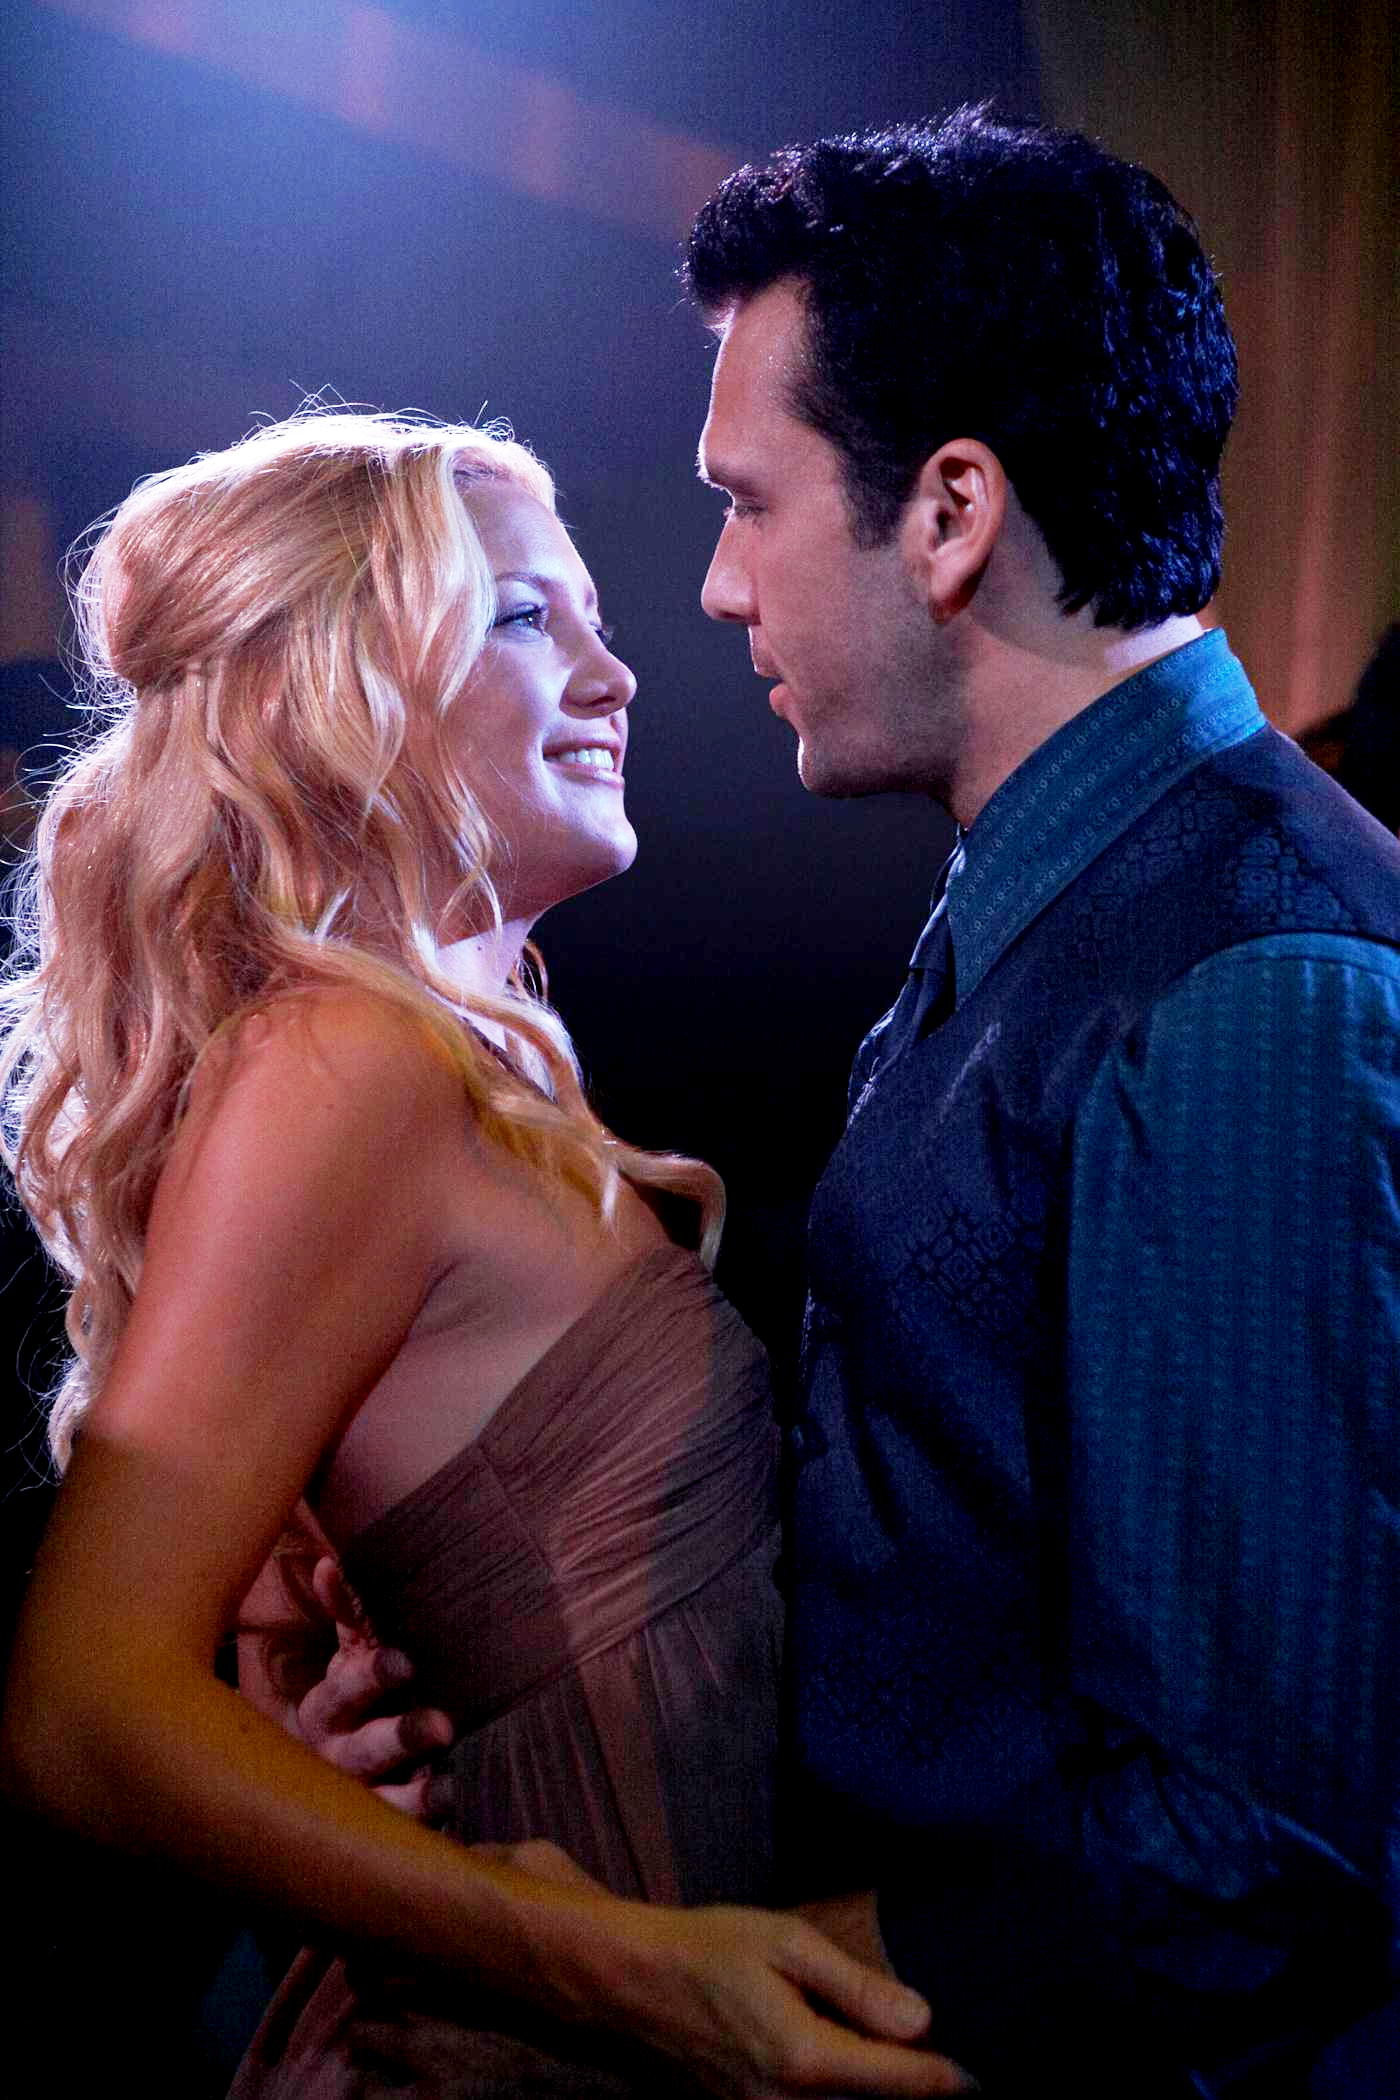 Kate Hudson stars as Alexis and Dane Cook stars as Tank in Lions Gate Films' My Best Friend's Girl (2008). Photo credit by Claire Folger.